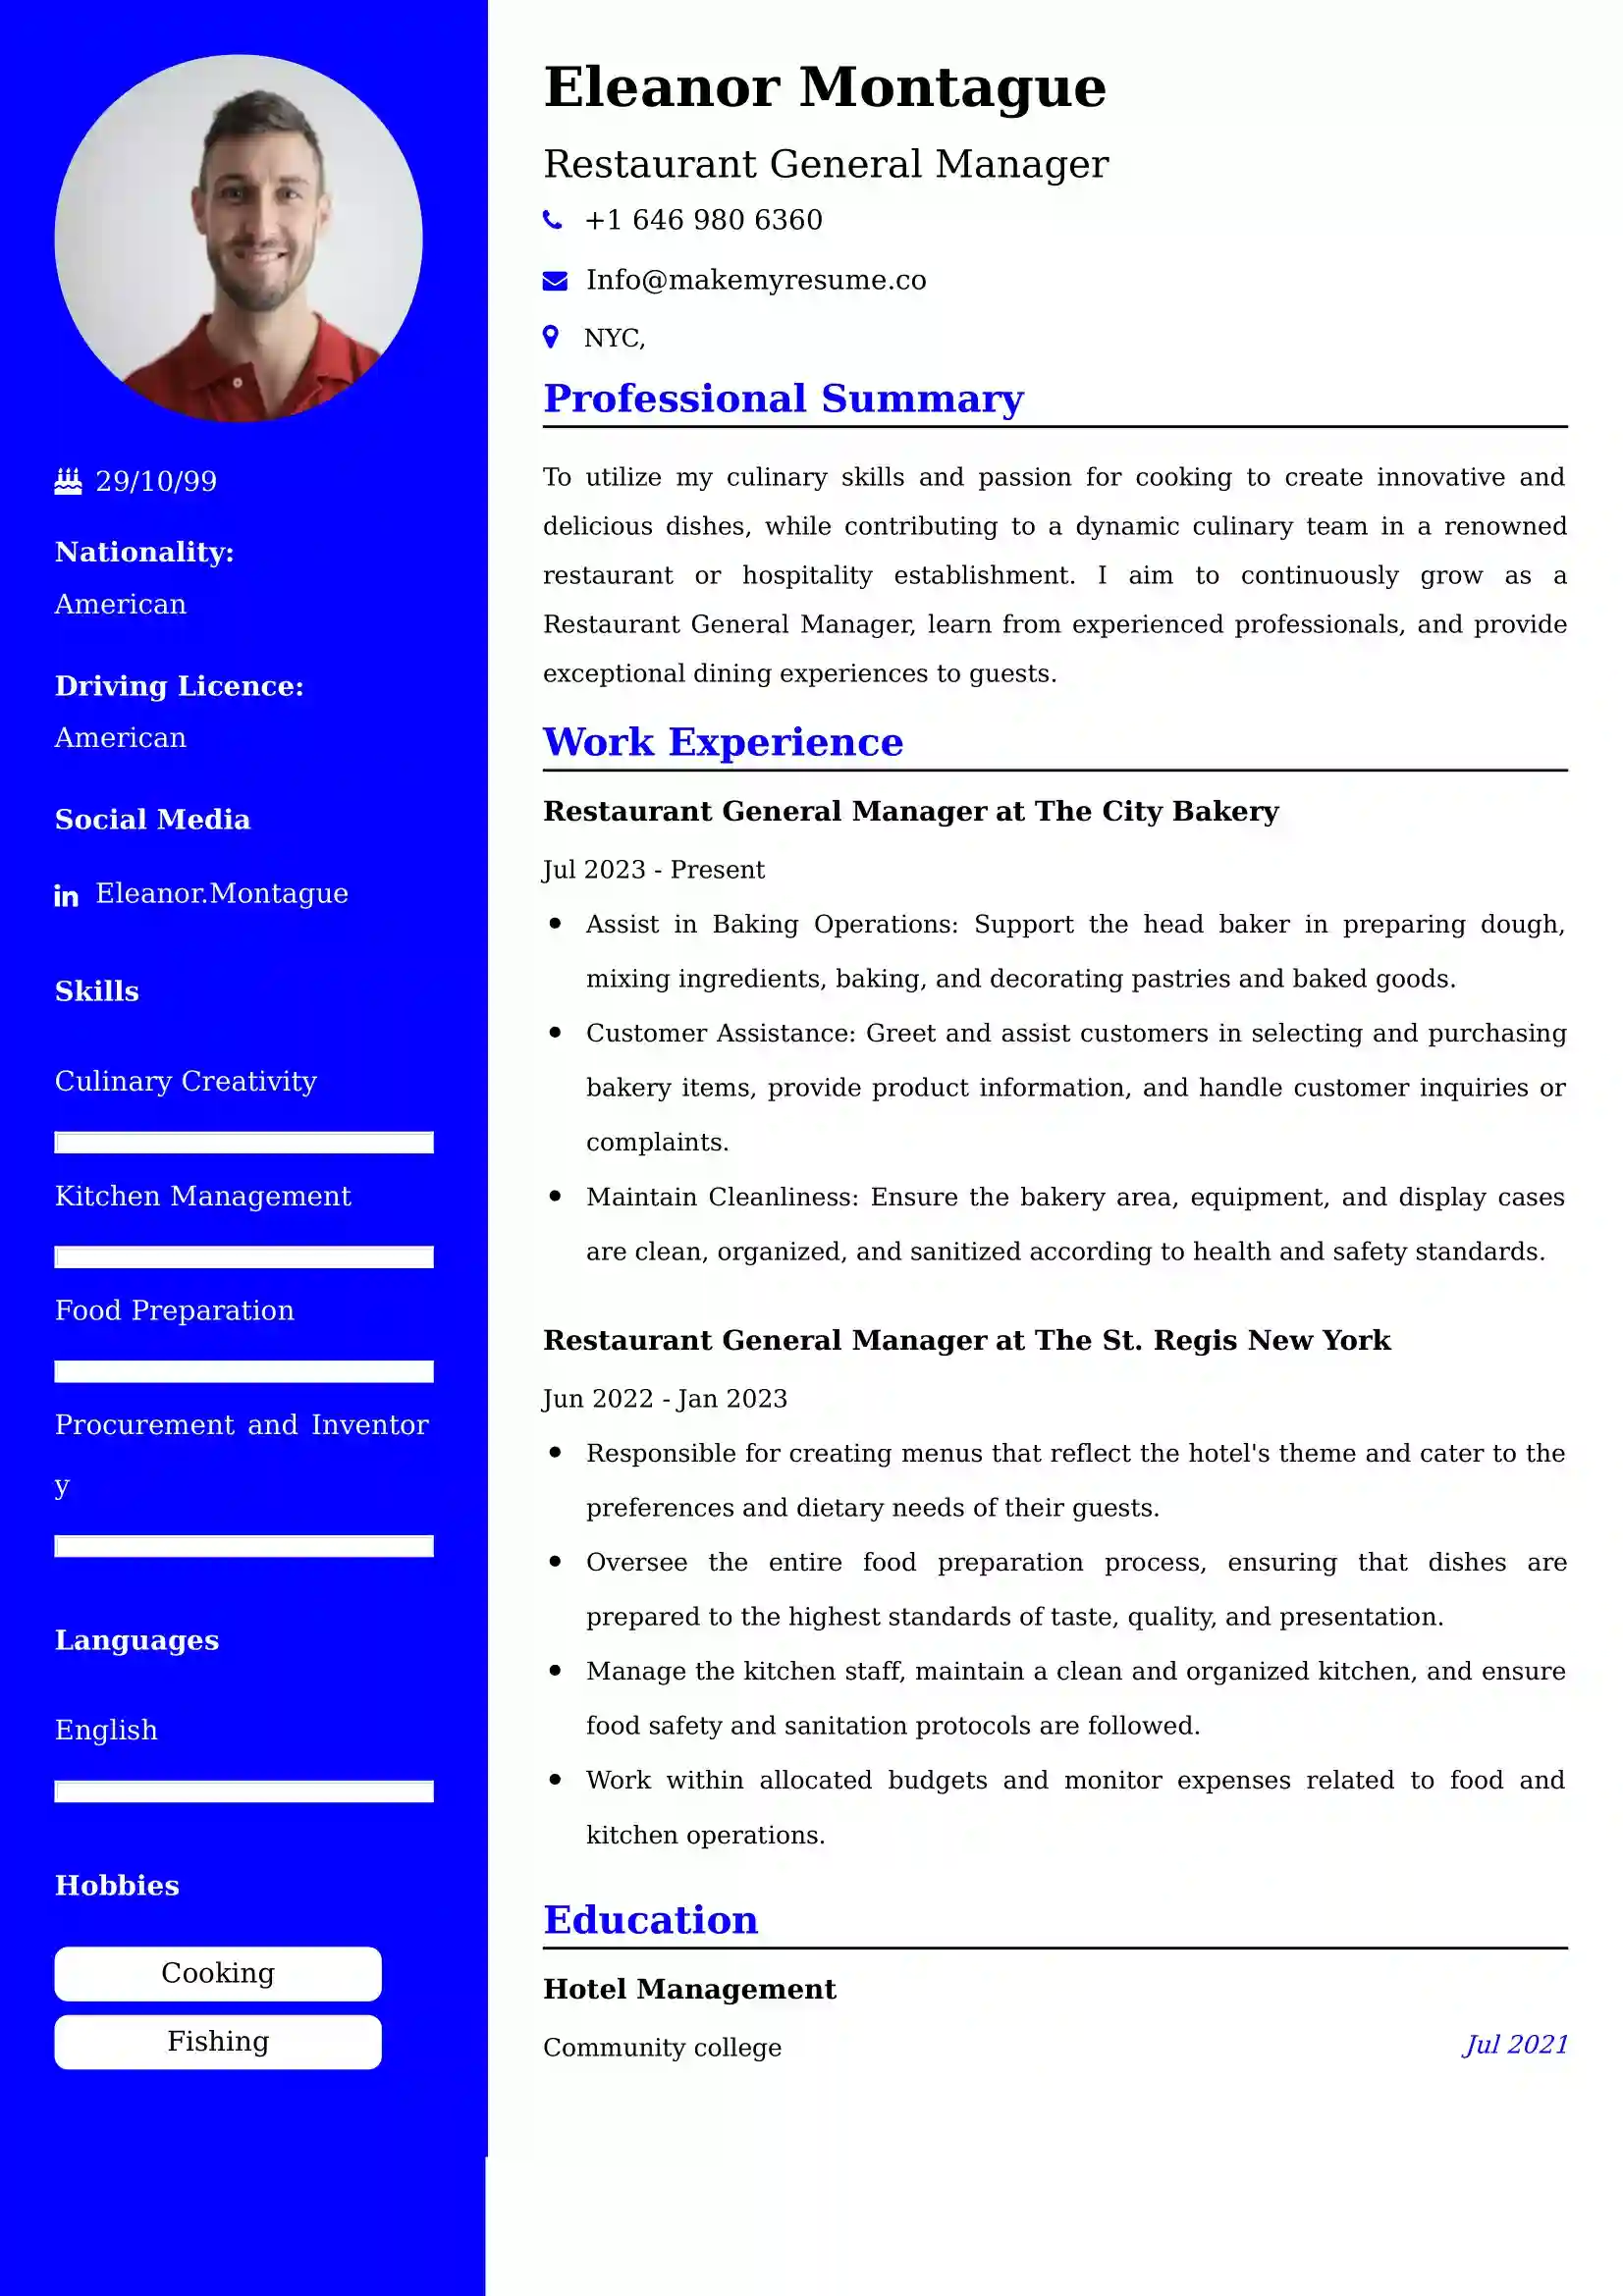 Restaurant General Manager Resume Examples - Brazilian Format, Latest Template